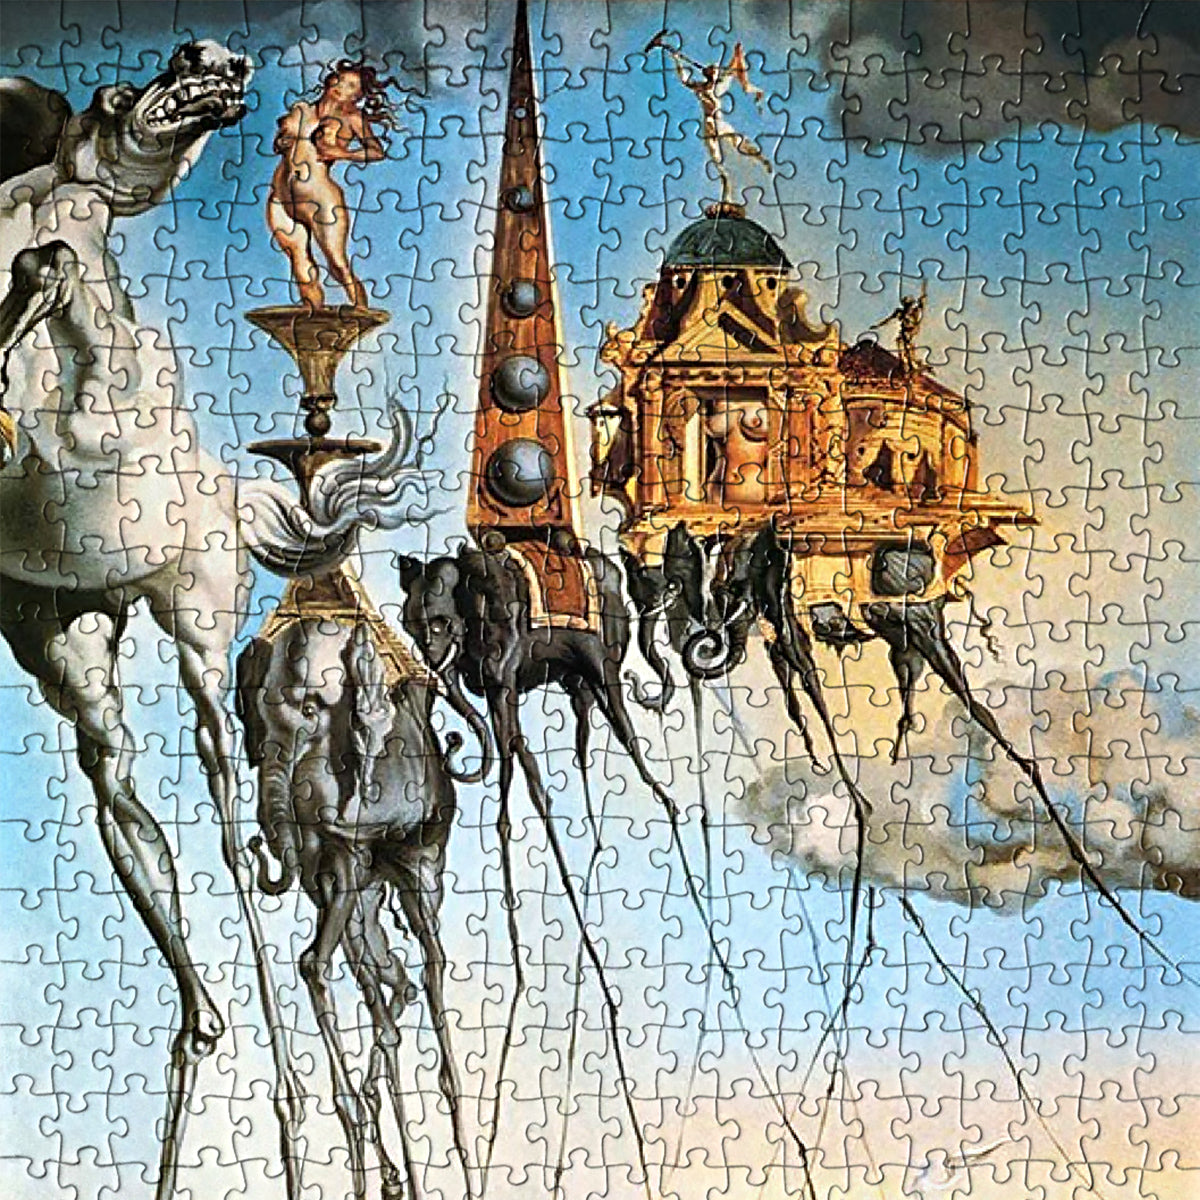 Solve the mystery of The Temptation of St. Anthony with this EuroGraphics jigsaw puzzle by Salvador Dali